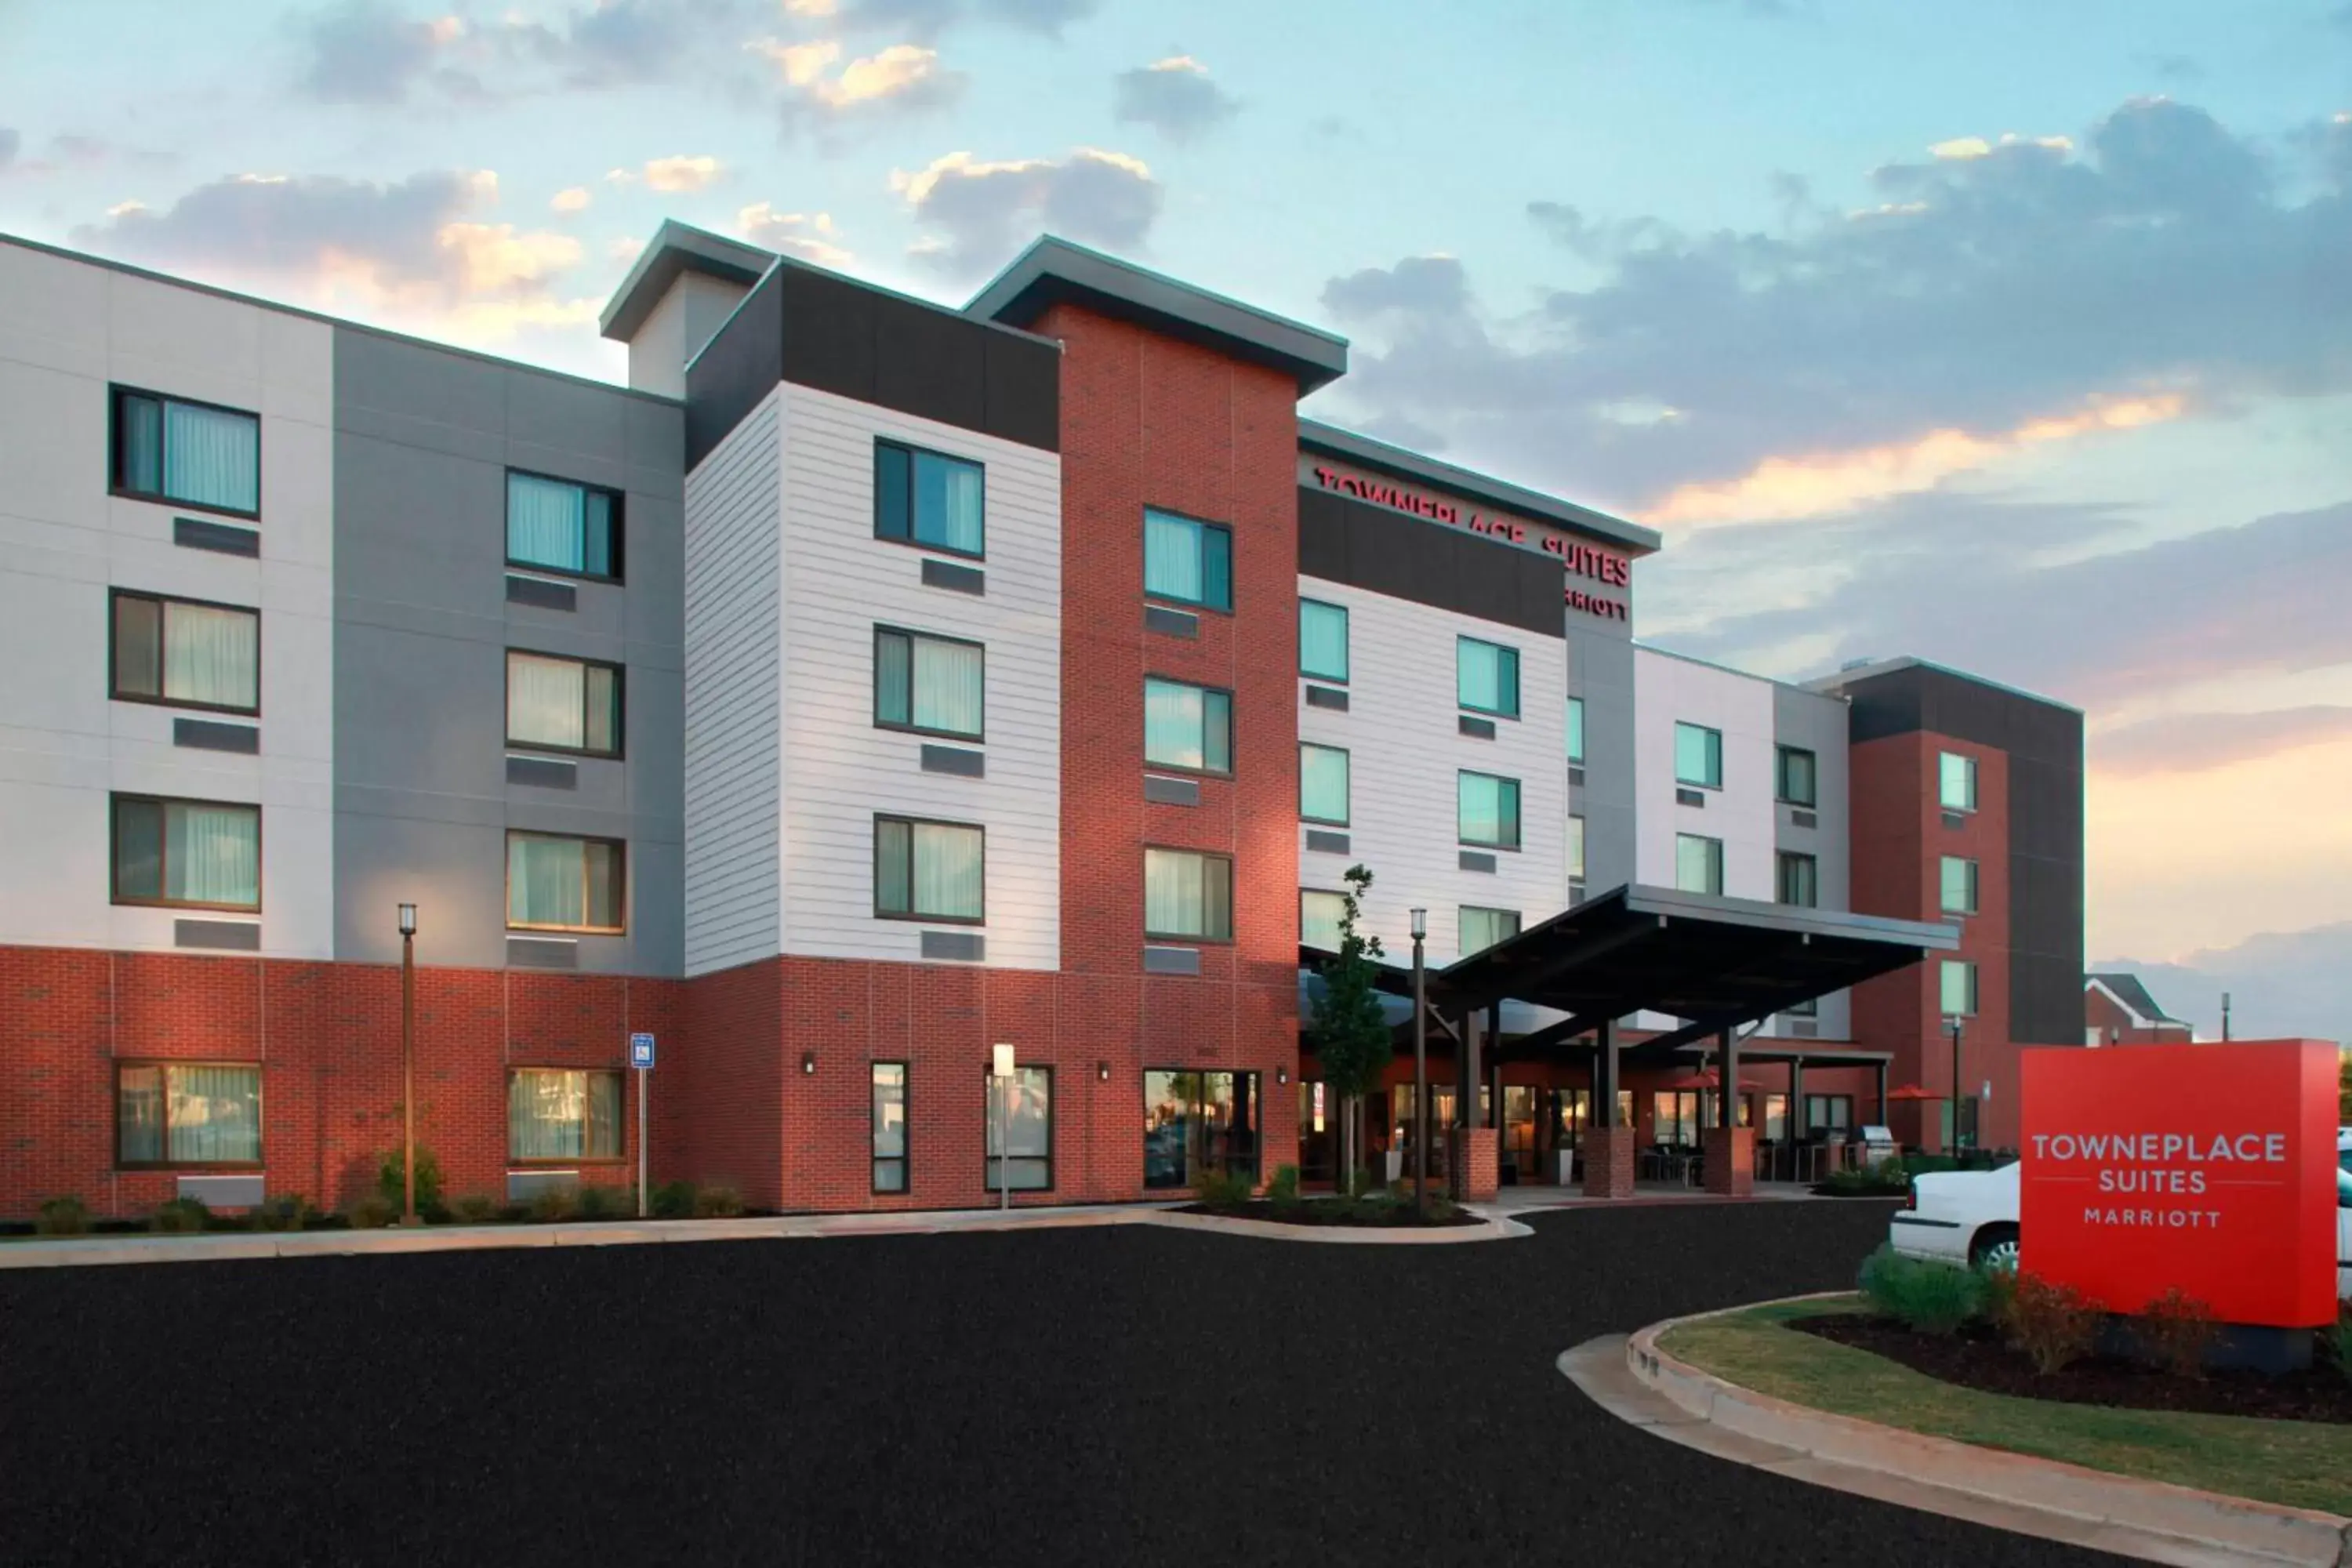 Property Building in TownePlace Suites by Marriott Macon Mercer University